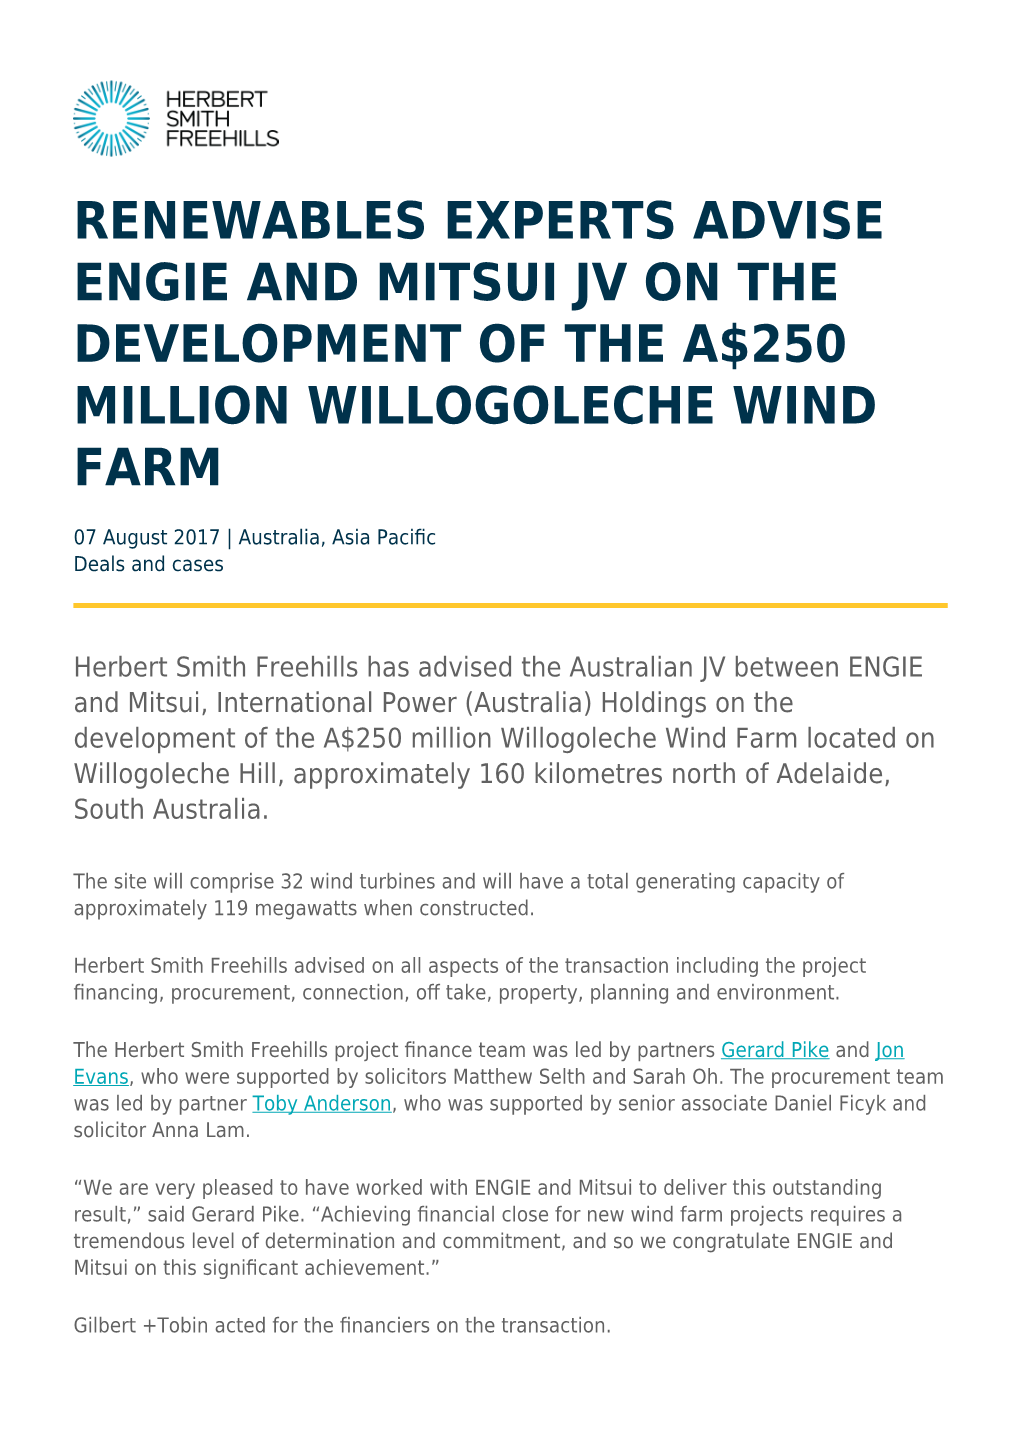 Renewables Experts Advise Engie and Mitsui Jv on the Development of the A$250 Million Willogoleche Wind Farm